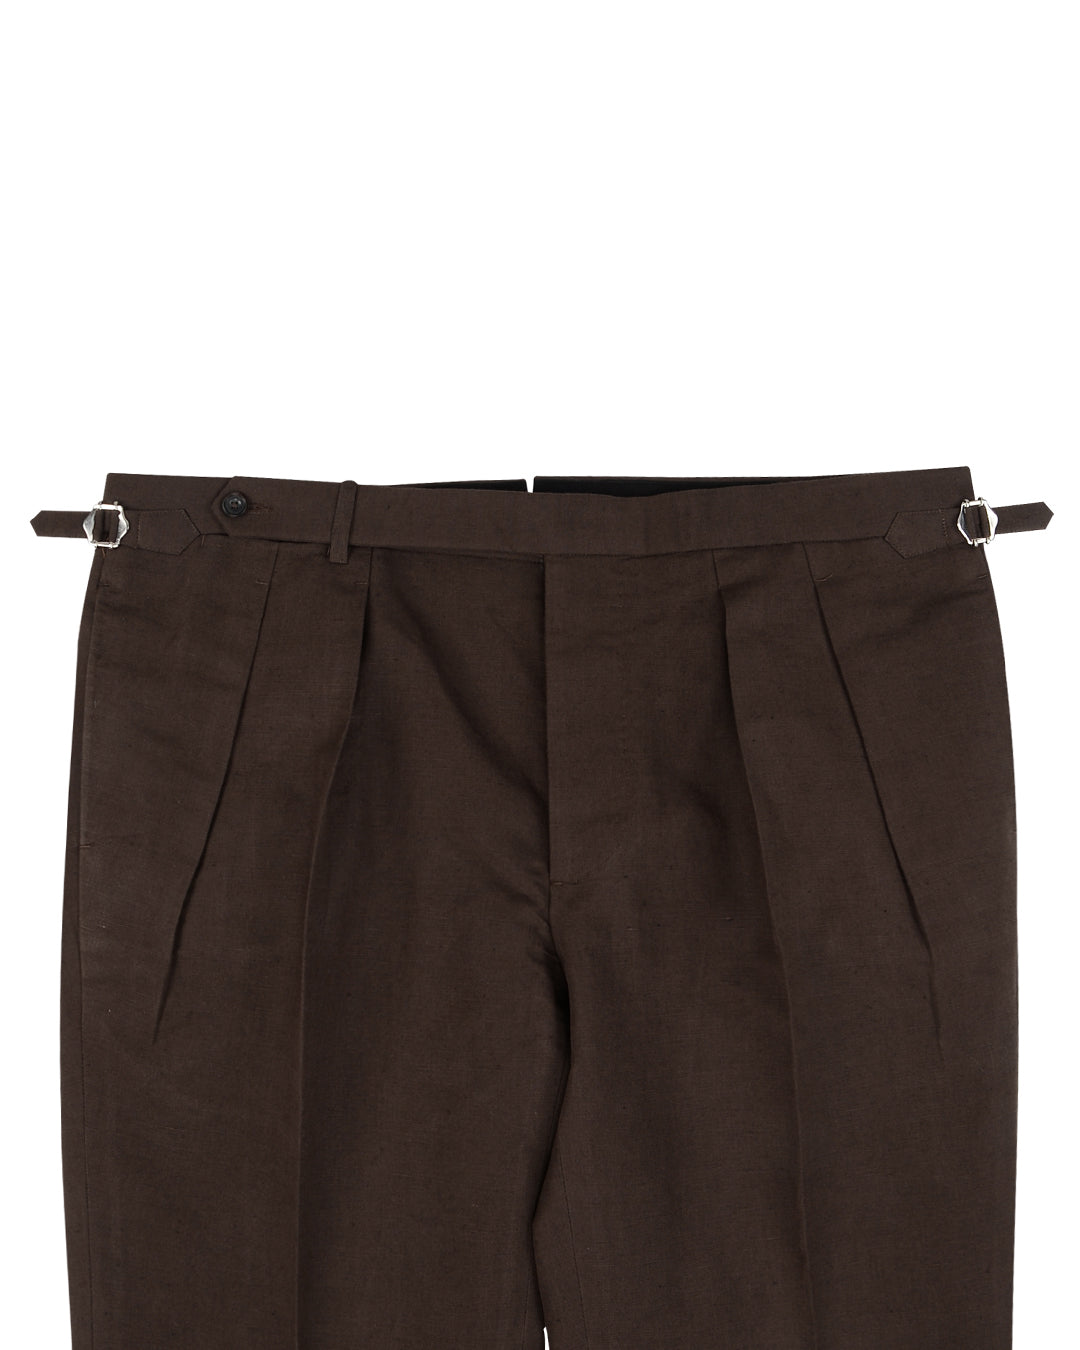 Front view of custom linen chino pants for men by Luxire in brown